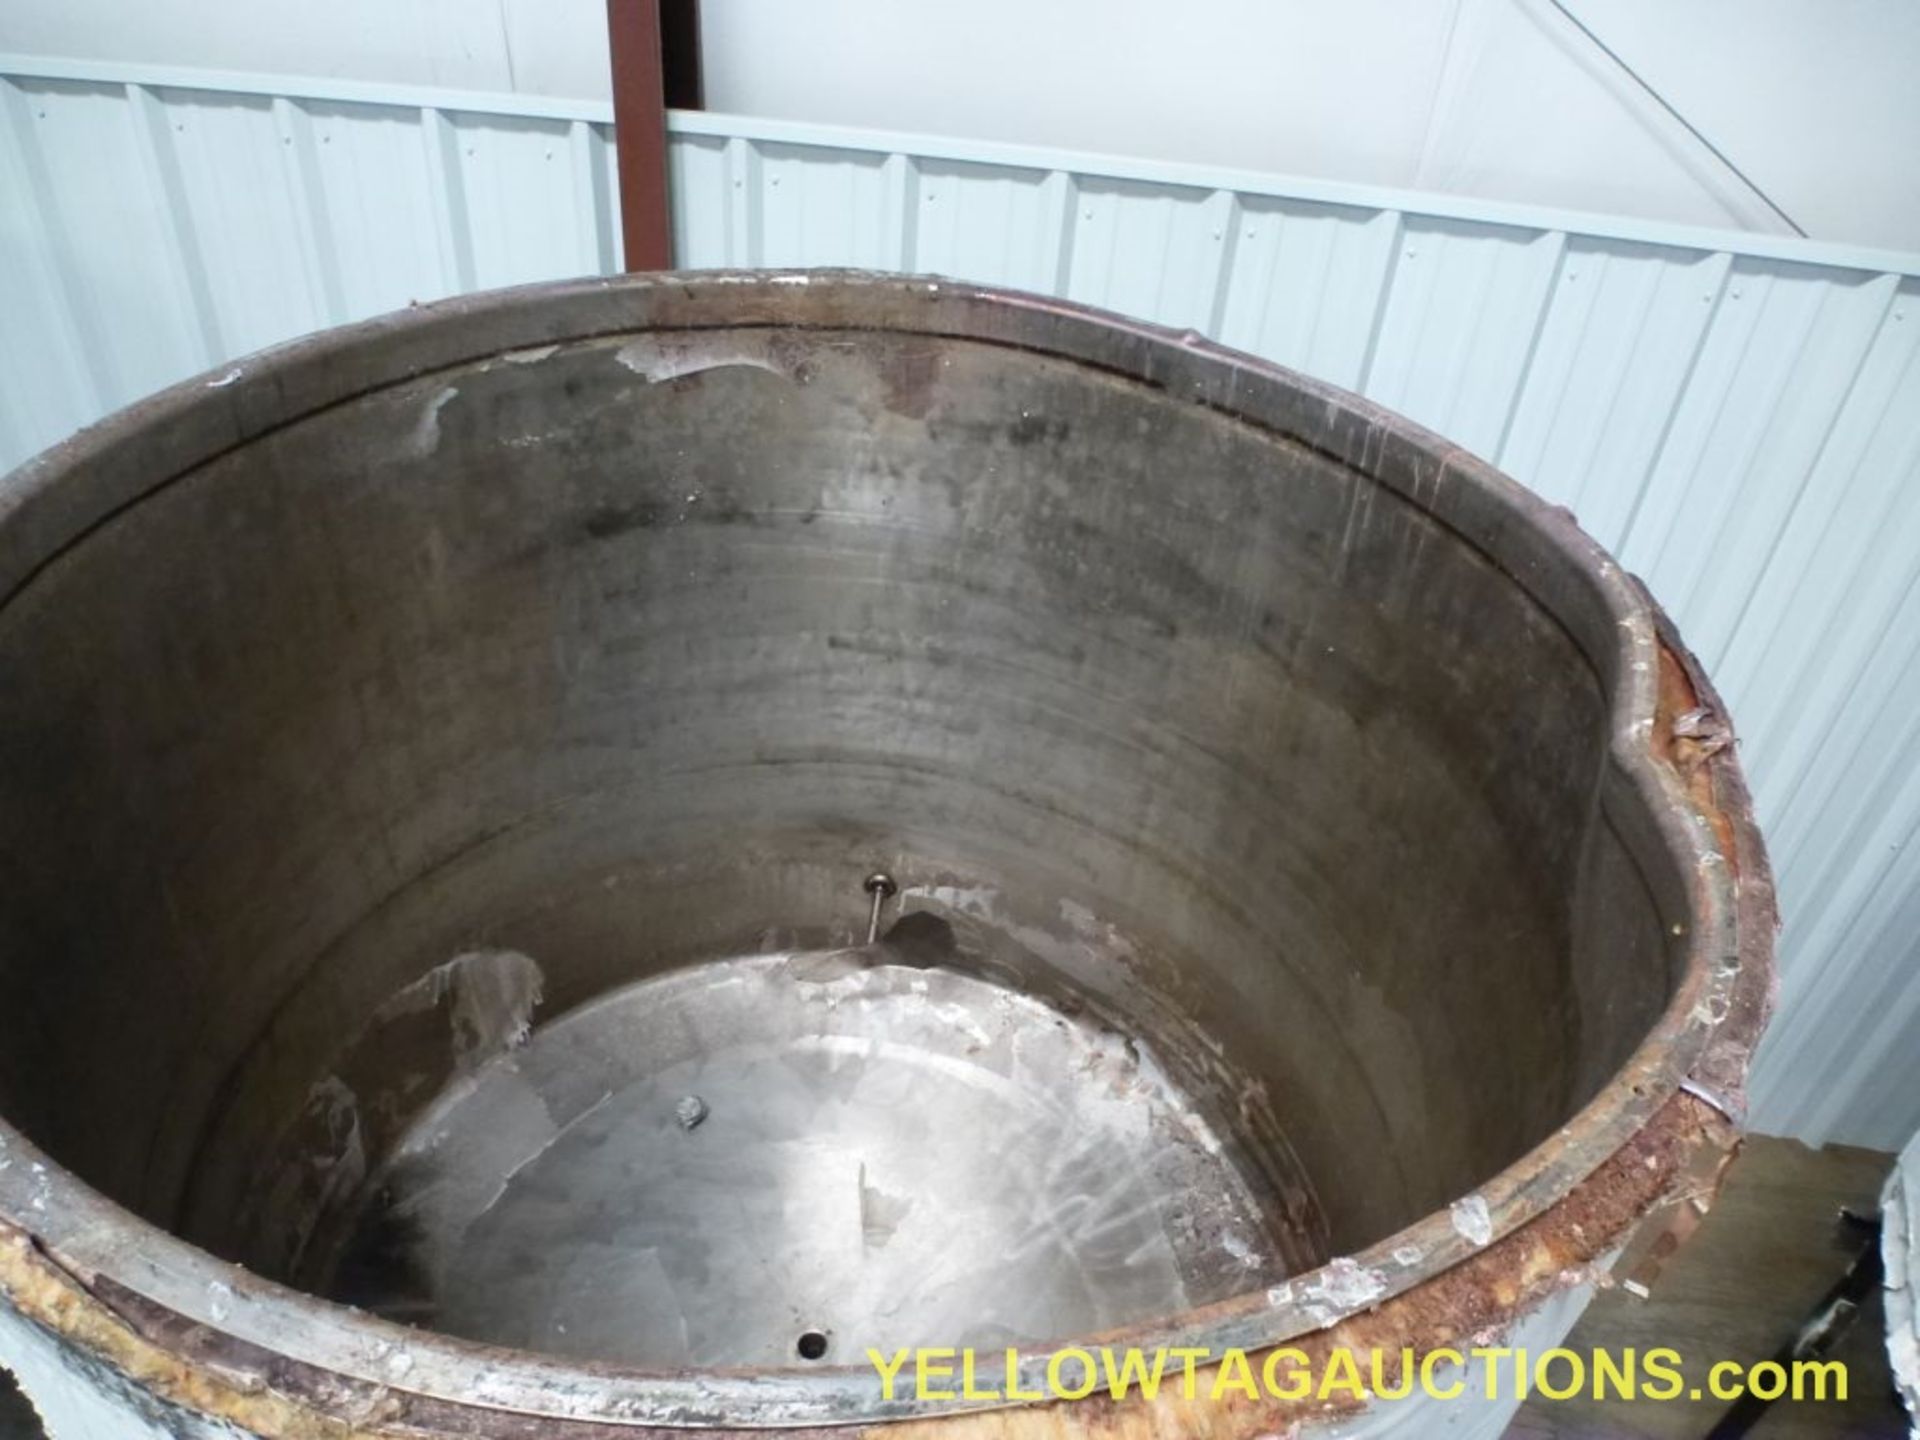 Stainless Steel Insulated Mixing Pot|52.5" D x 60" W|Lot Loading Fee: $5.00 - Image 9 of 9